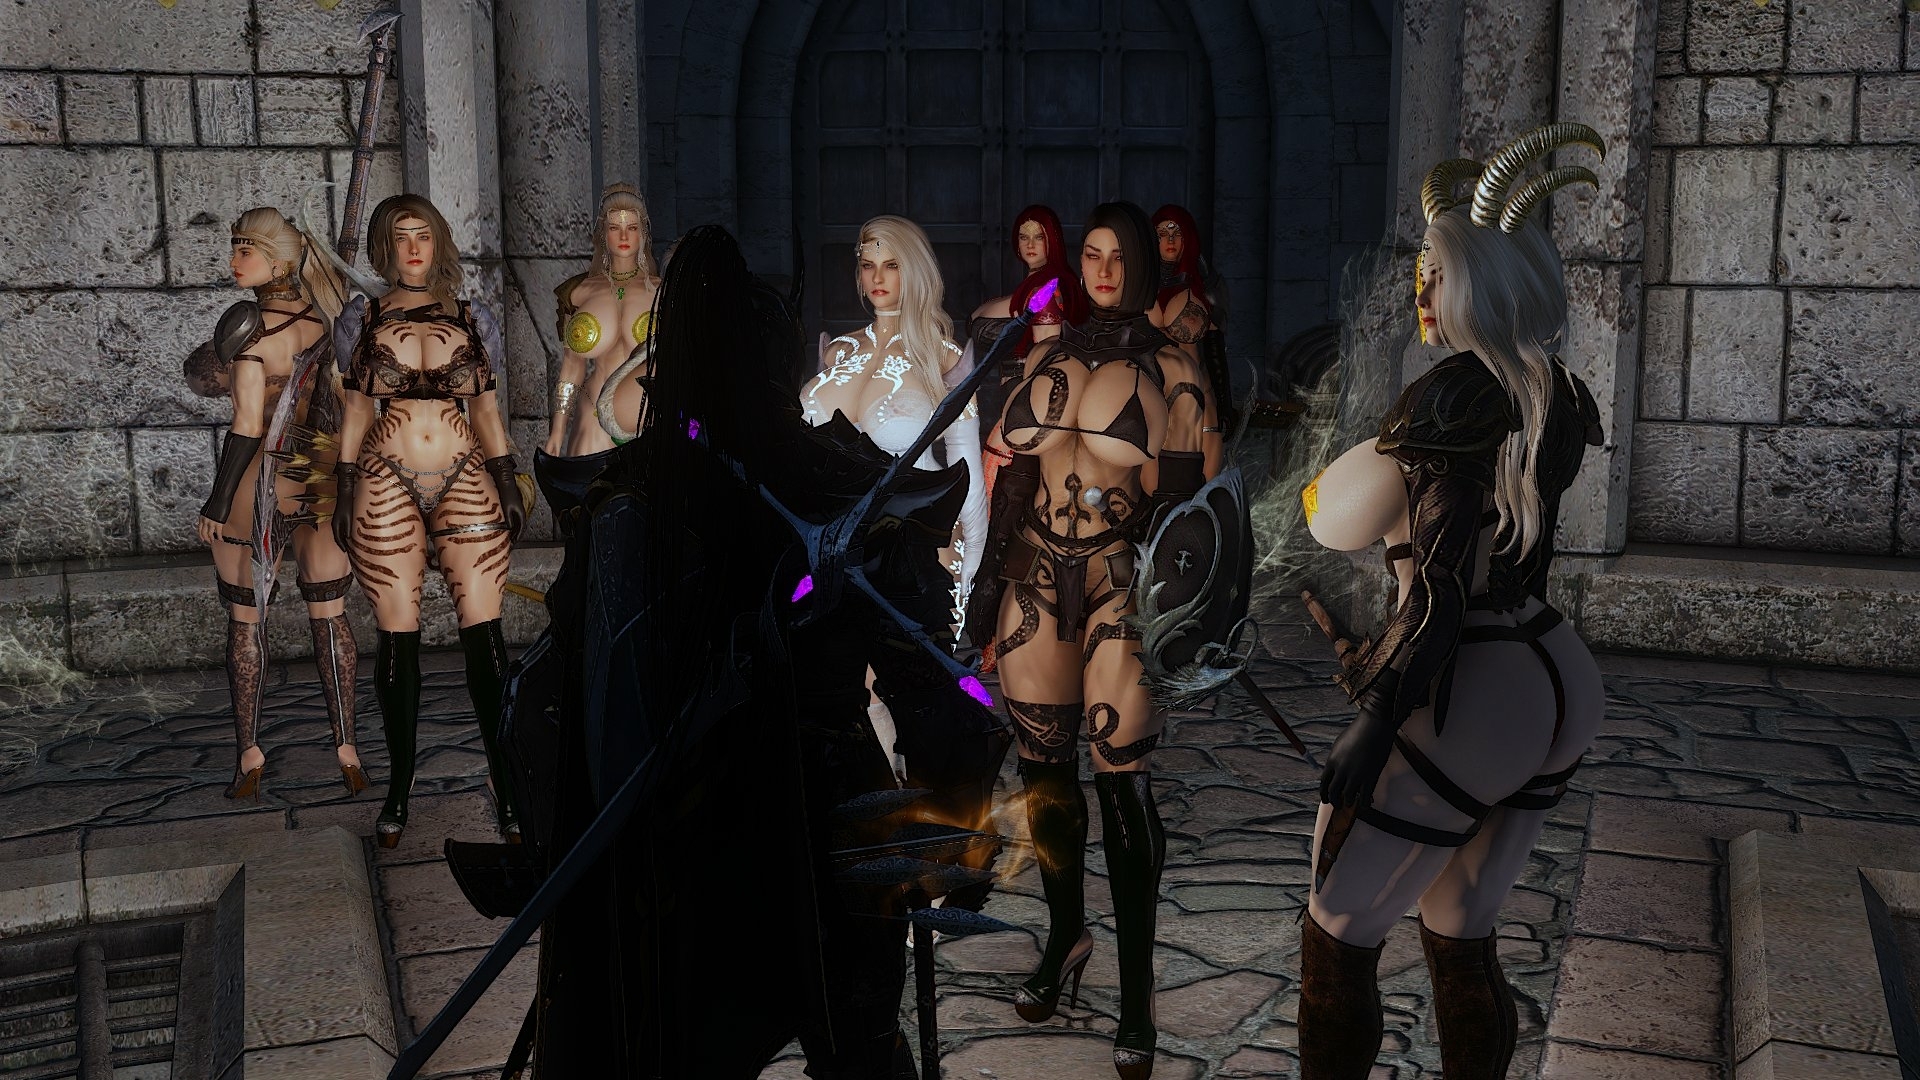 In game Crew Orgy with big female warriors Skyrim 3D porn modding Skyrim 3d Porn Game Gameplay Big Tits Big Breasts Sexy Orgy Gangbang Muscles Musclegirl Abs Fantasy Armor Clothing Videogame